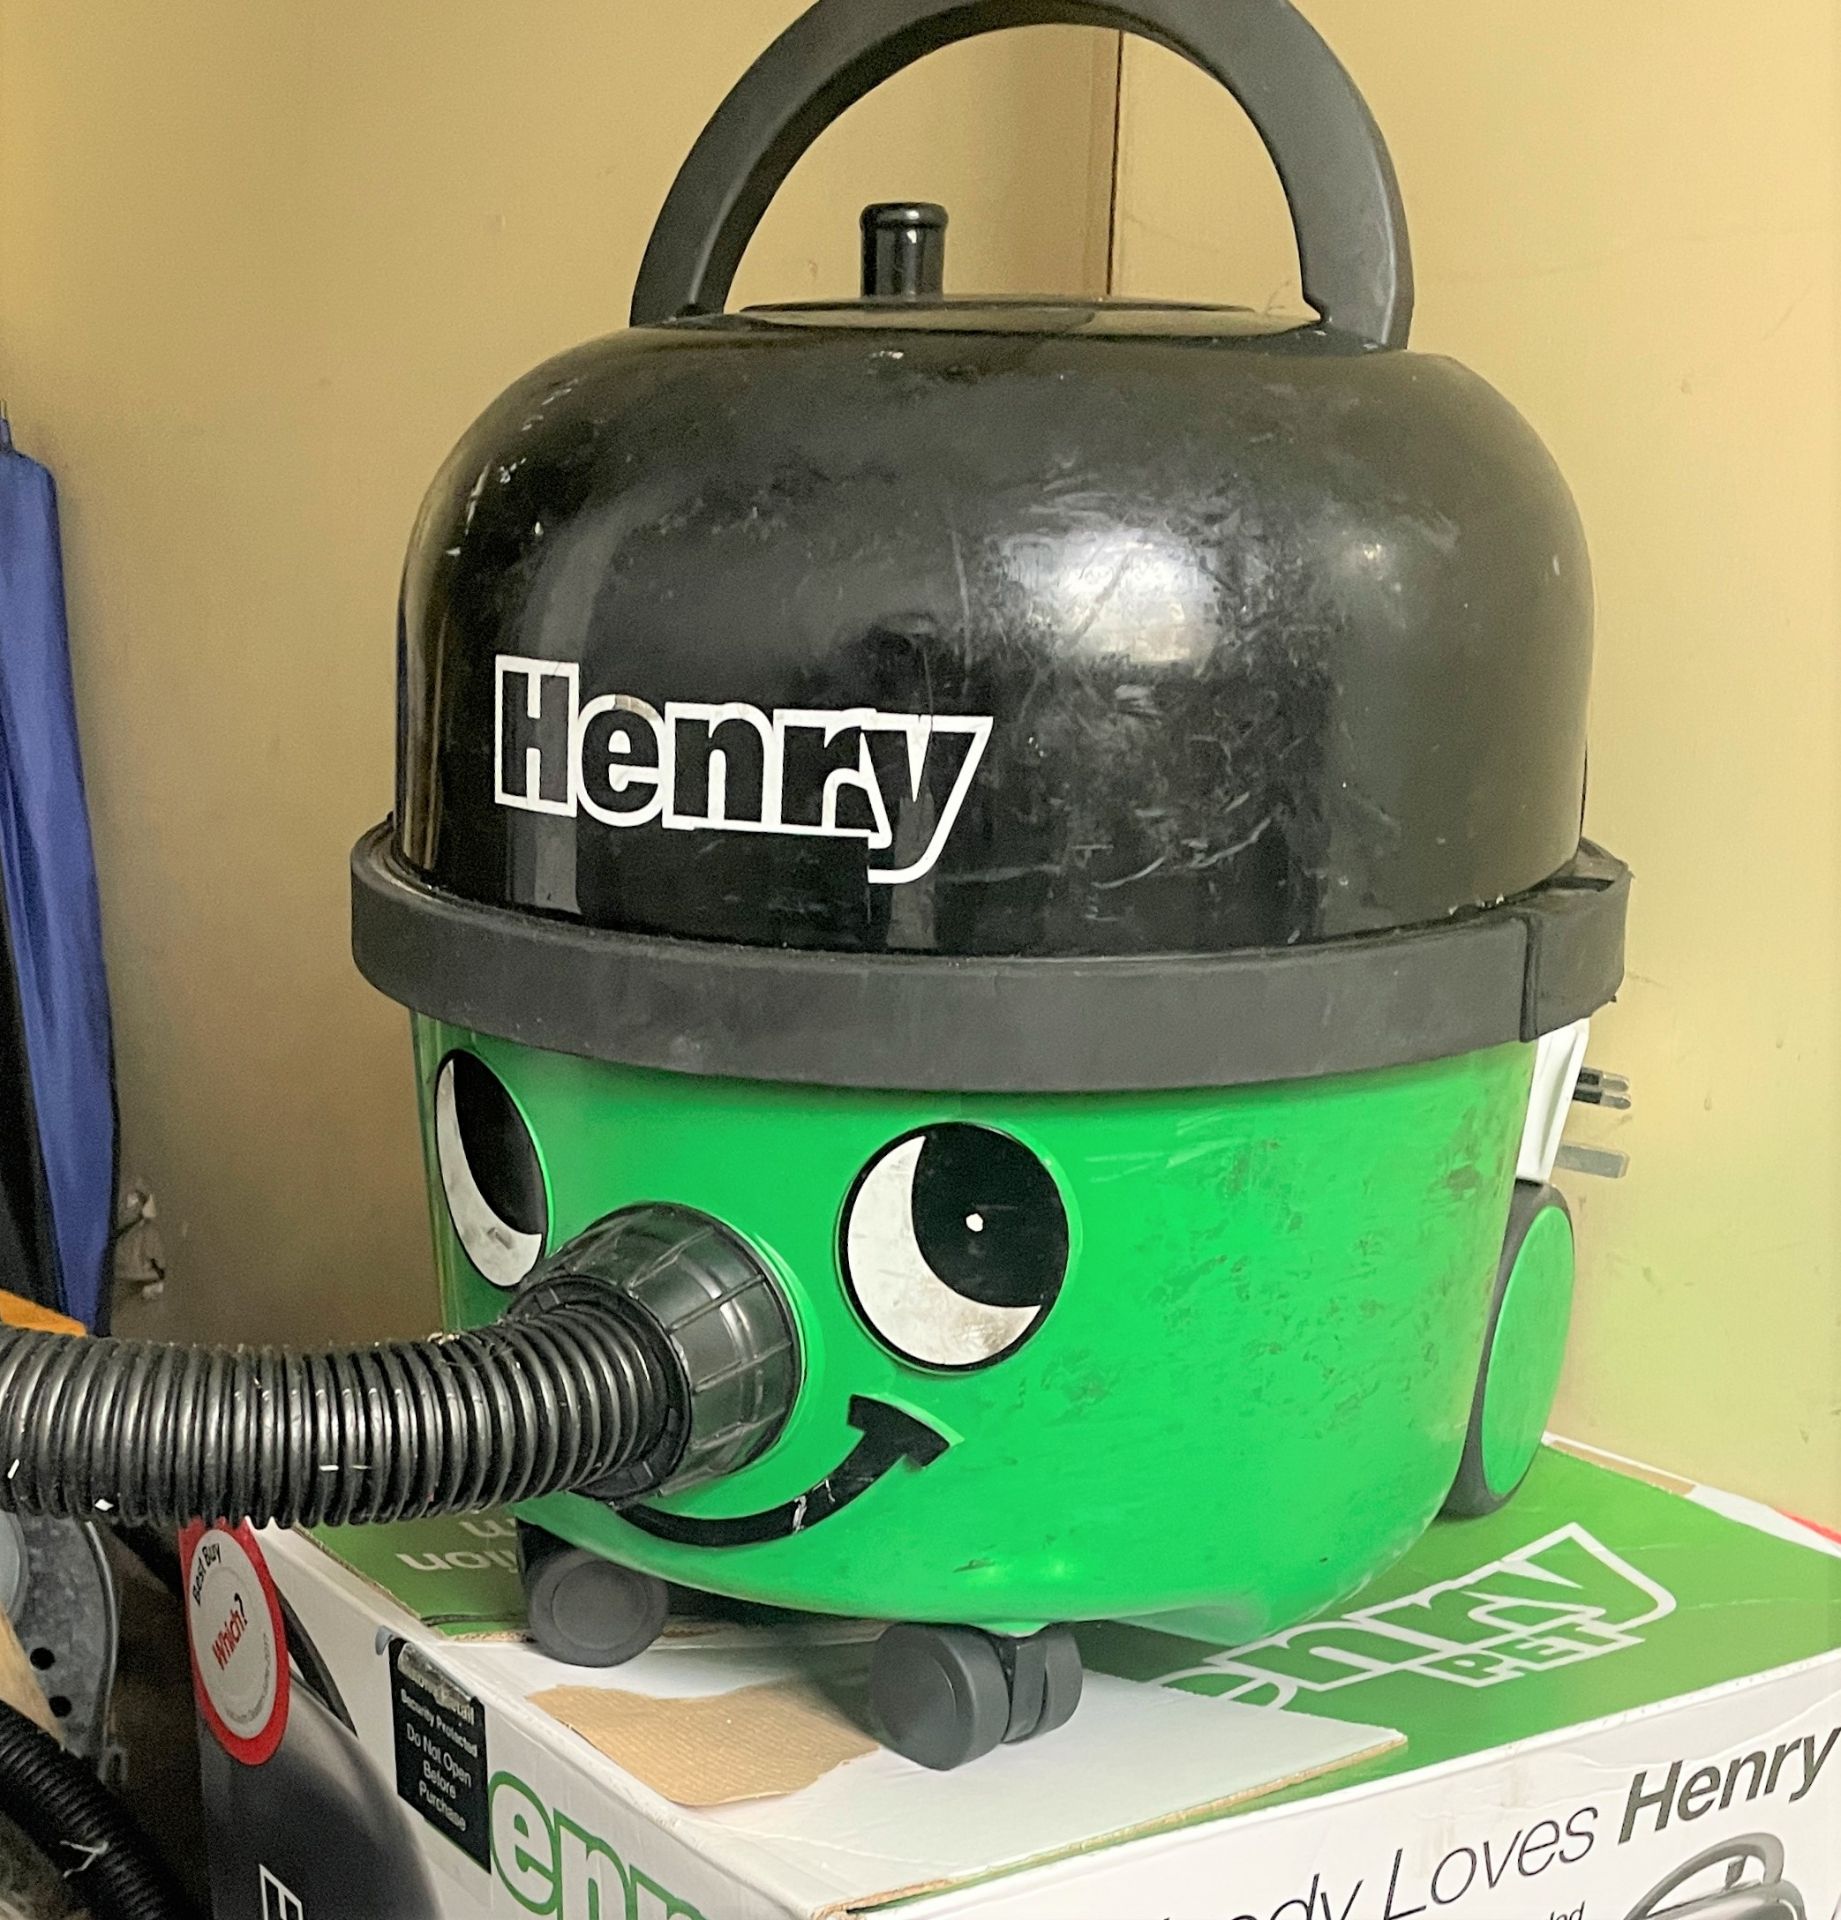 1 x Henry Hoover Pet Vacuum Cleaner With Original Box - Ref: HTYS - CL782 - Location: Leicester,